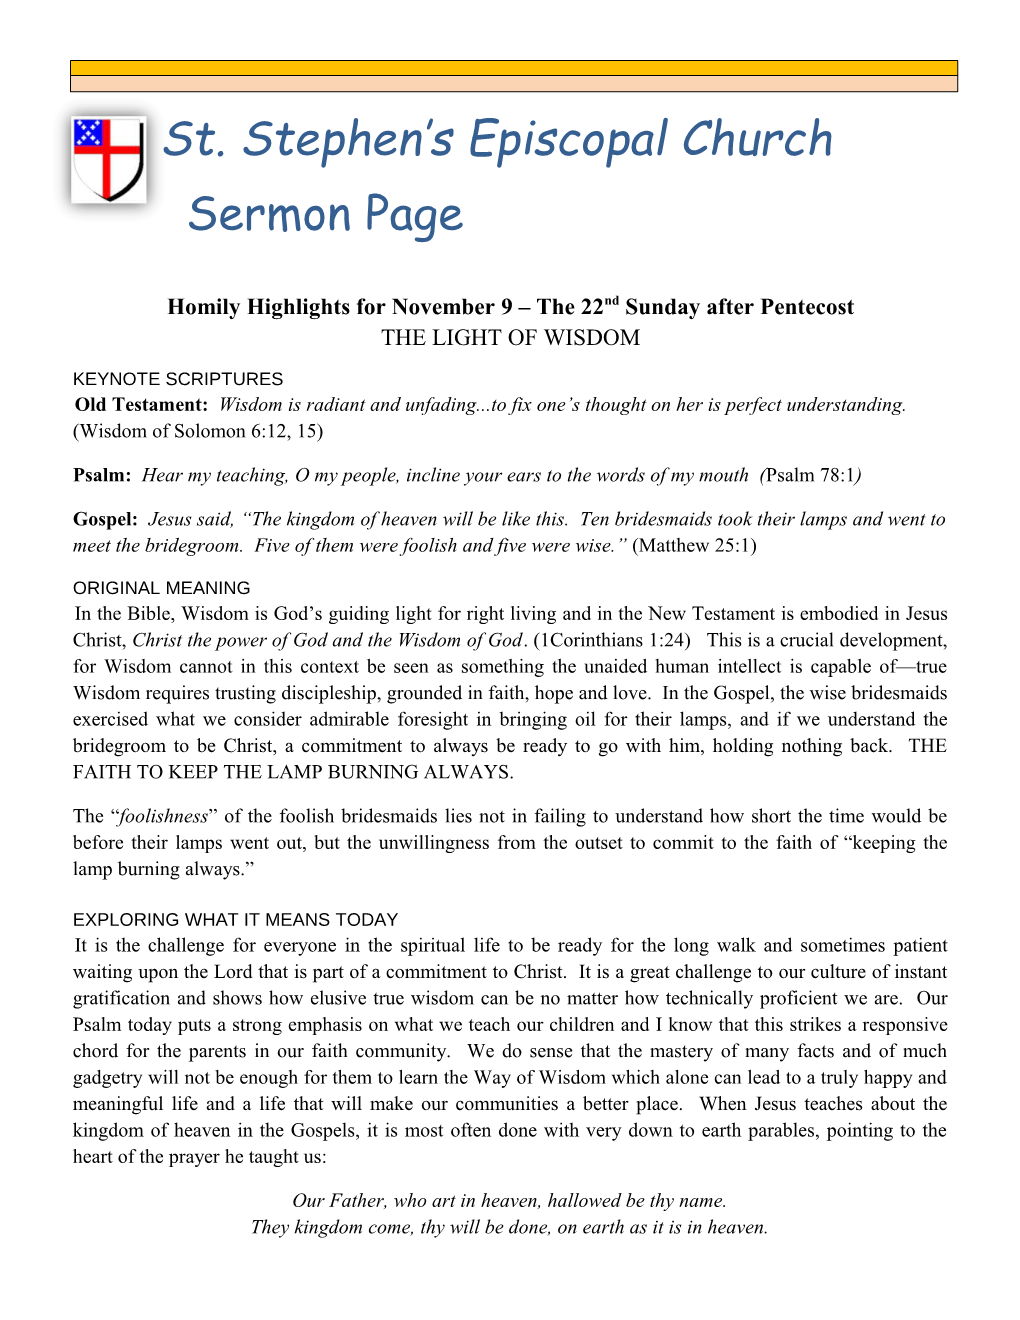 Homily Highlights for November 9 the 22Nd Sunday After Pentecost